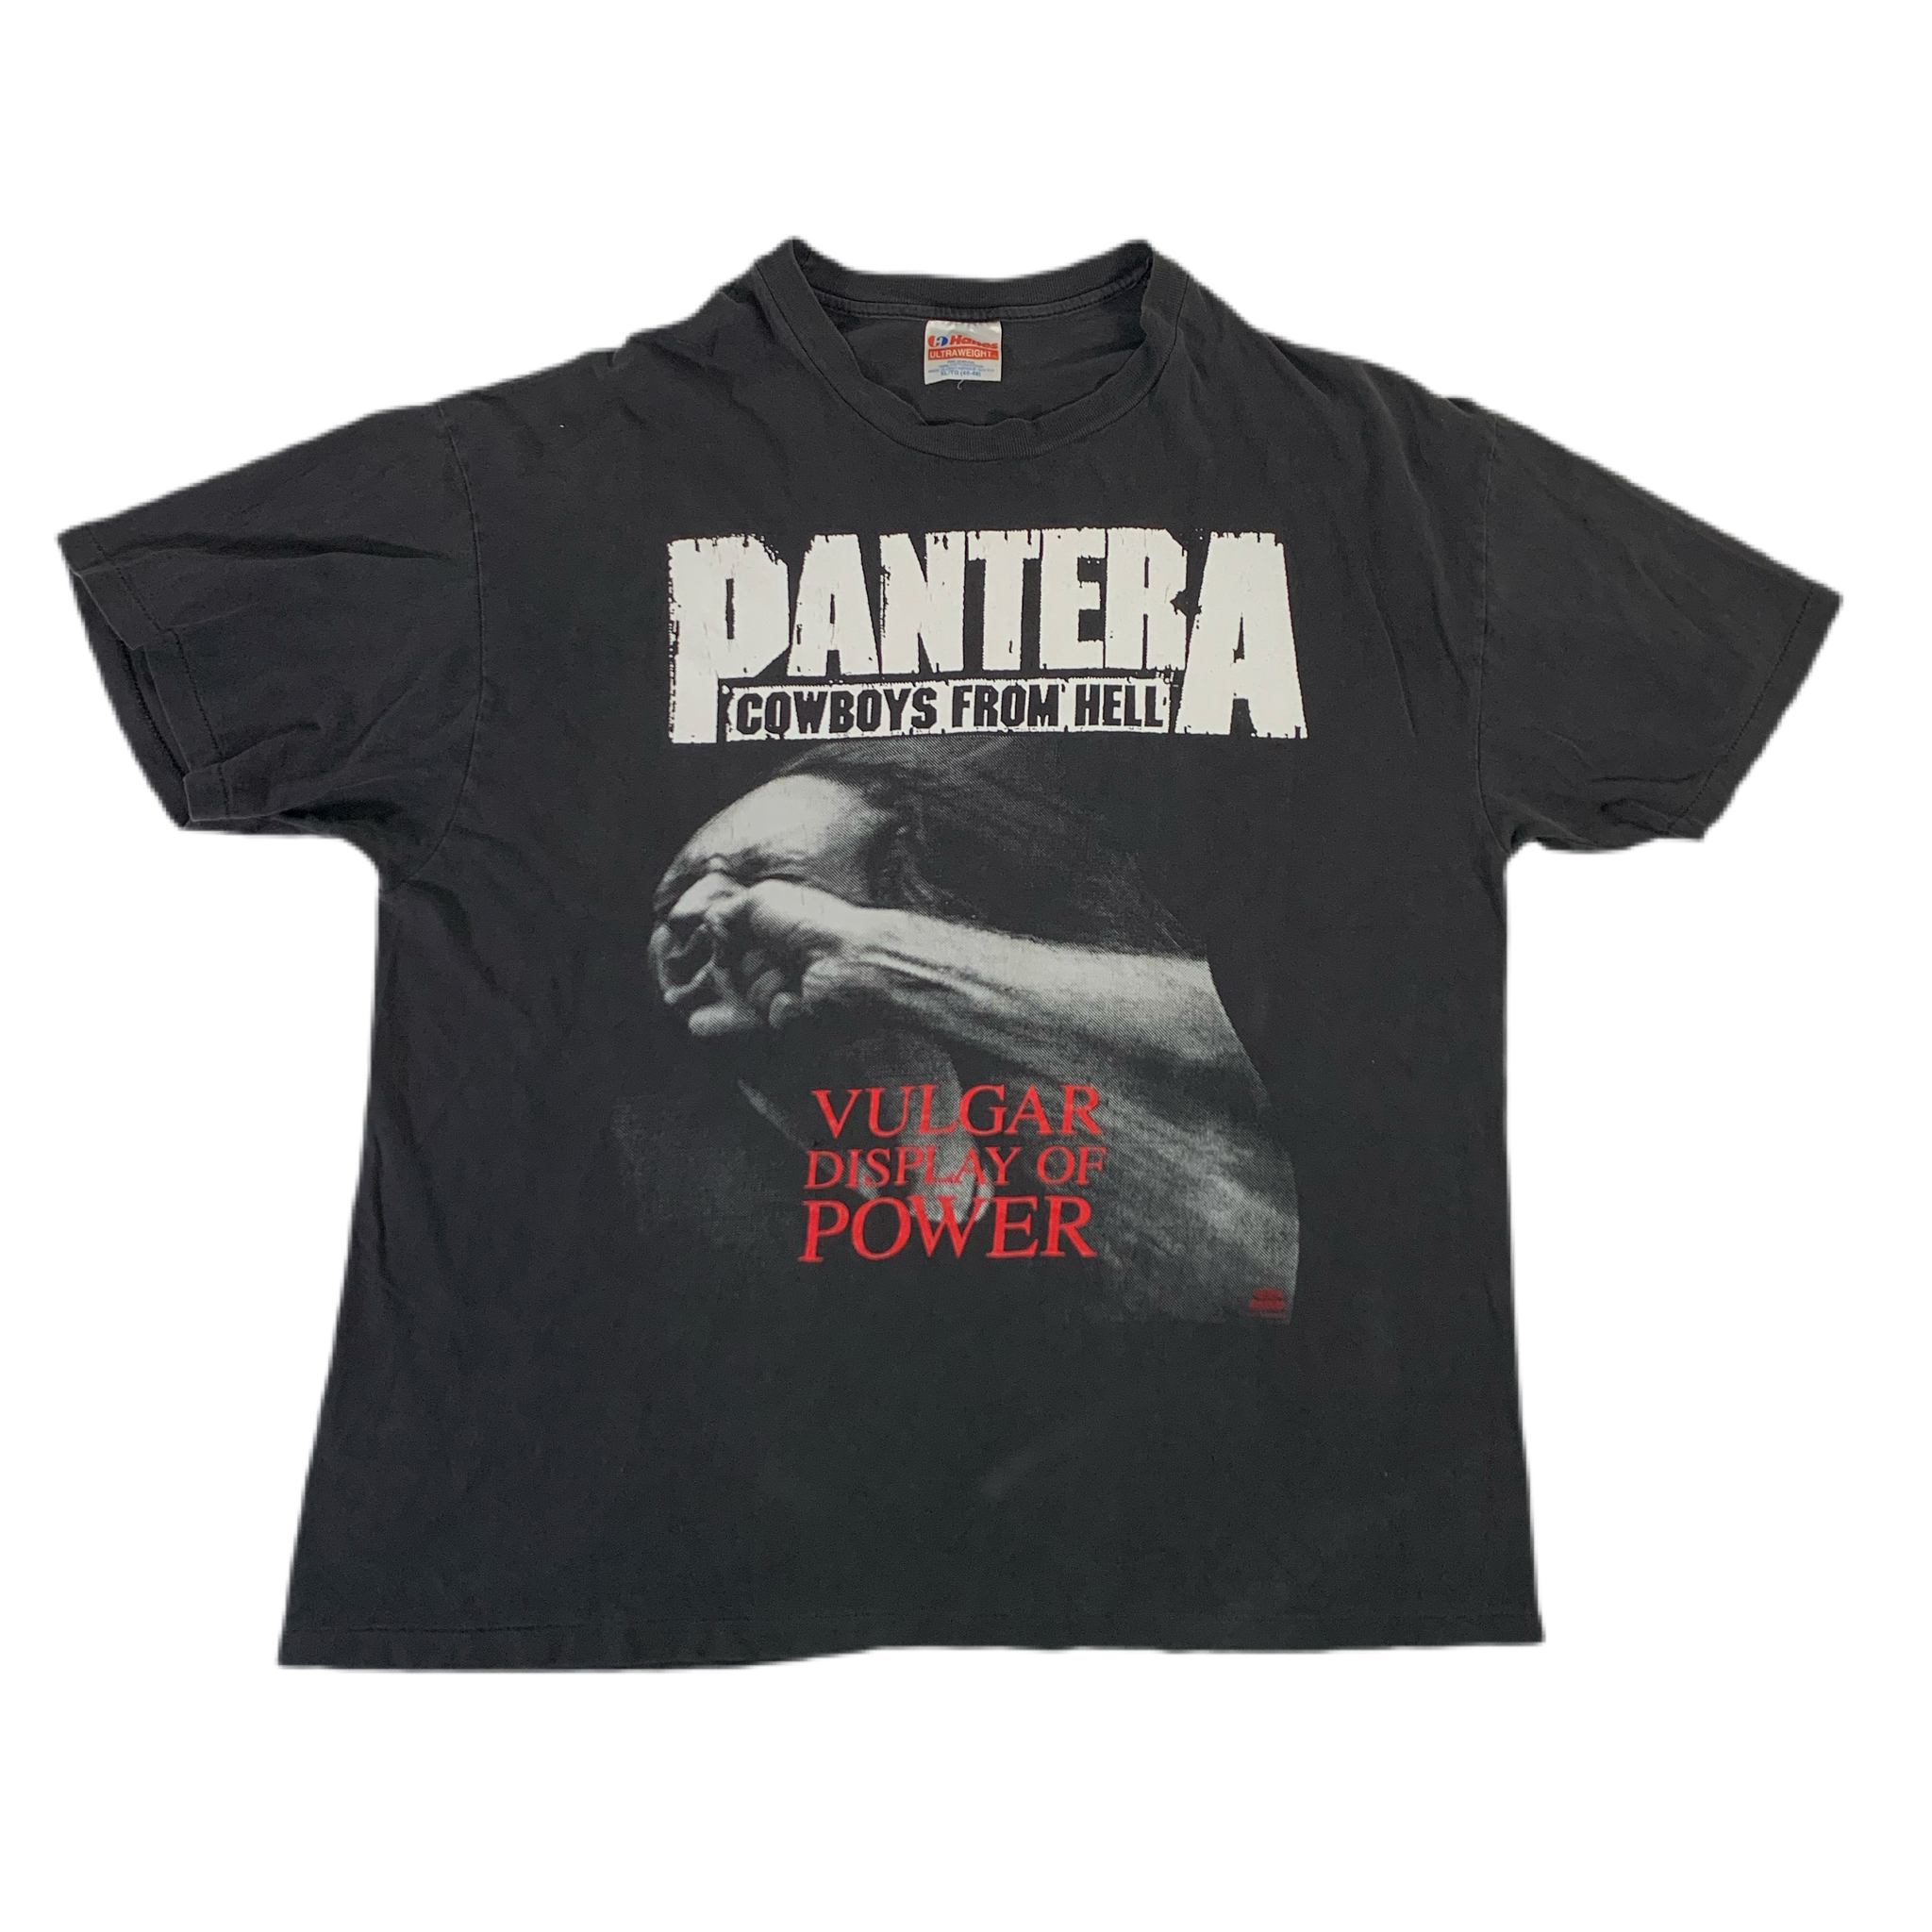 Stronger Than All Red Hoodie – Pantera Official Store